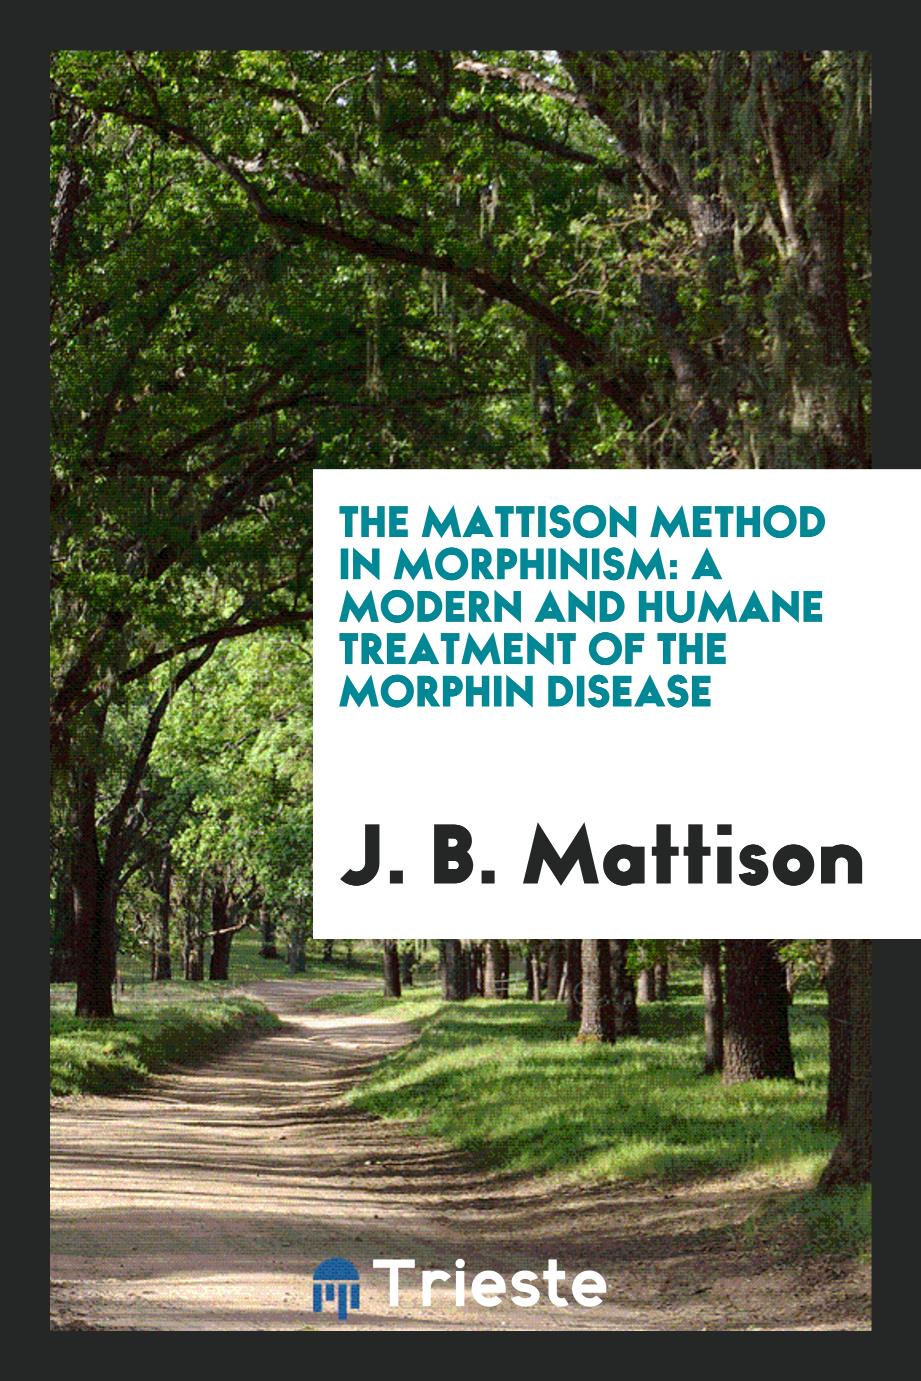 The Mattison method in morphinism: A modern and Humane Treatment of the Morphin Disease